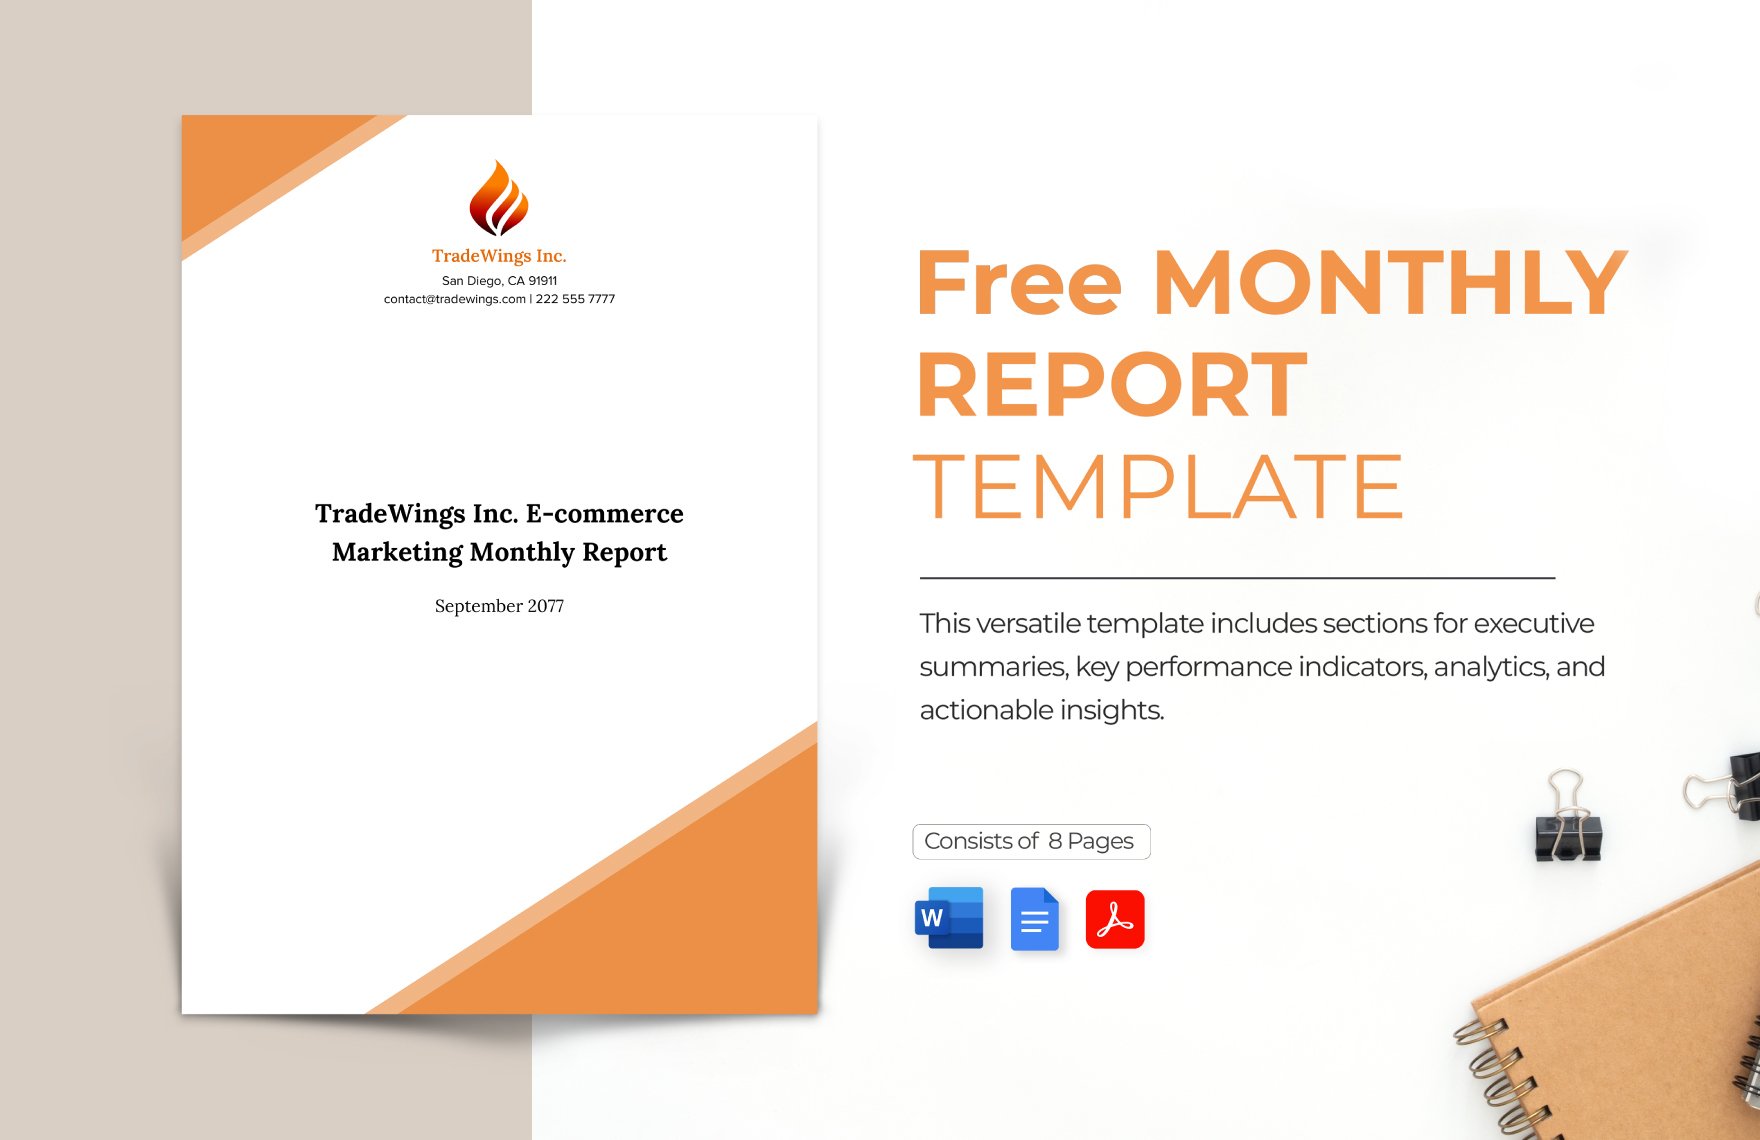 Free Monthly Report Template in Word, Google Docs, PDF